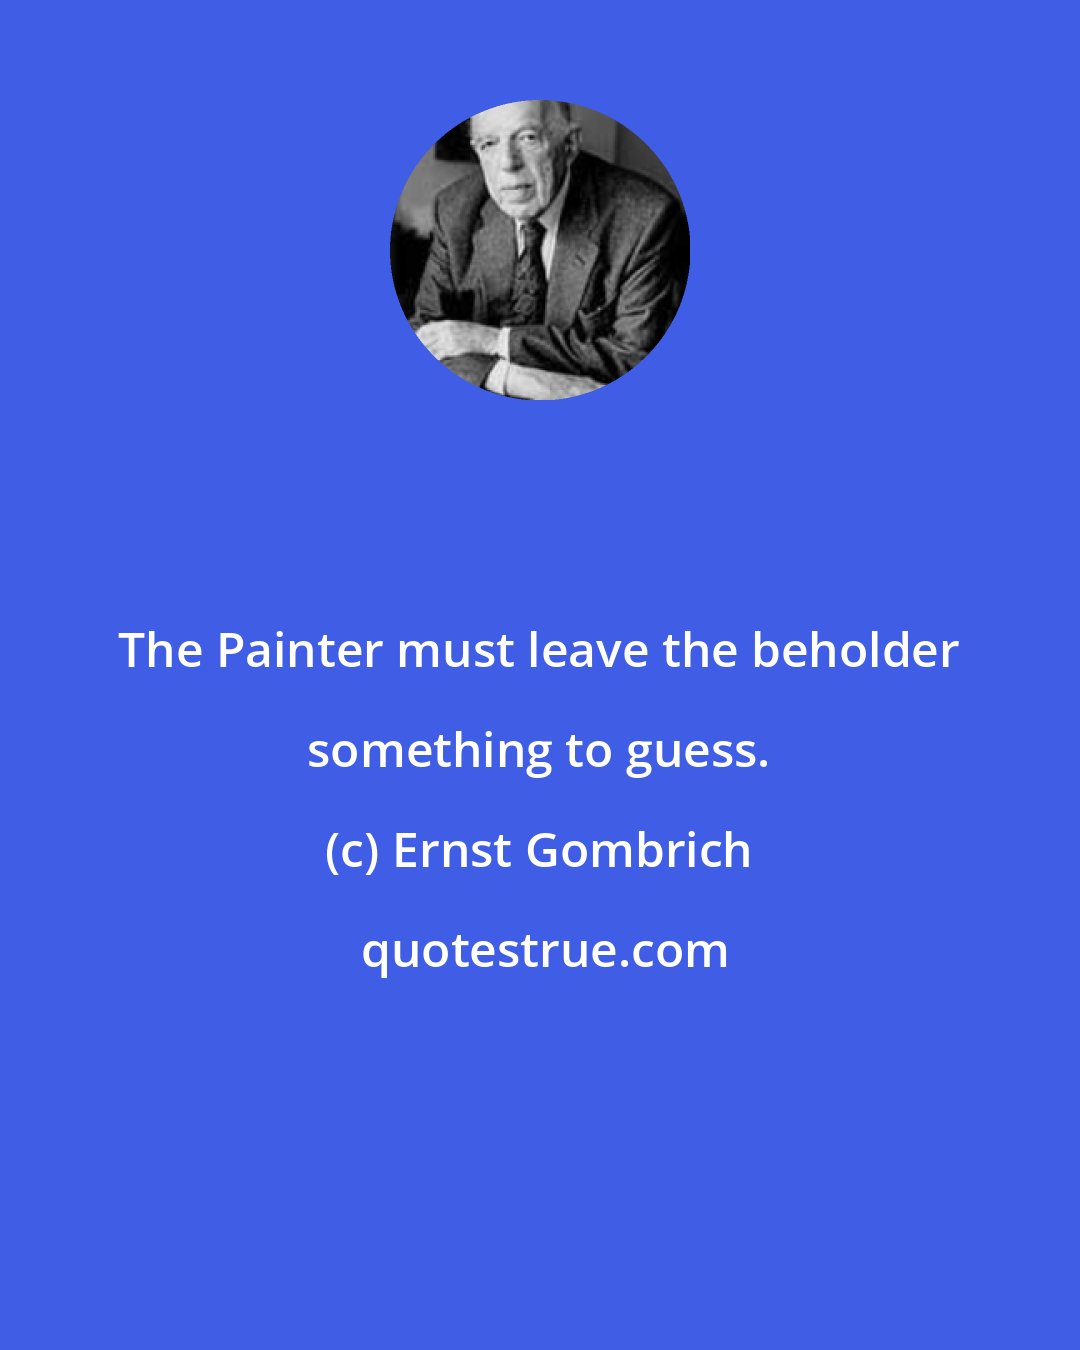 Ernst Gombrich: The Painter must leave the beholder something to guess.